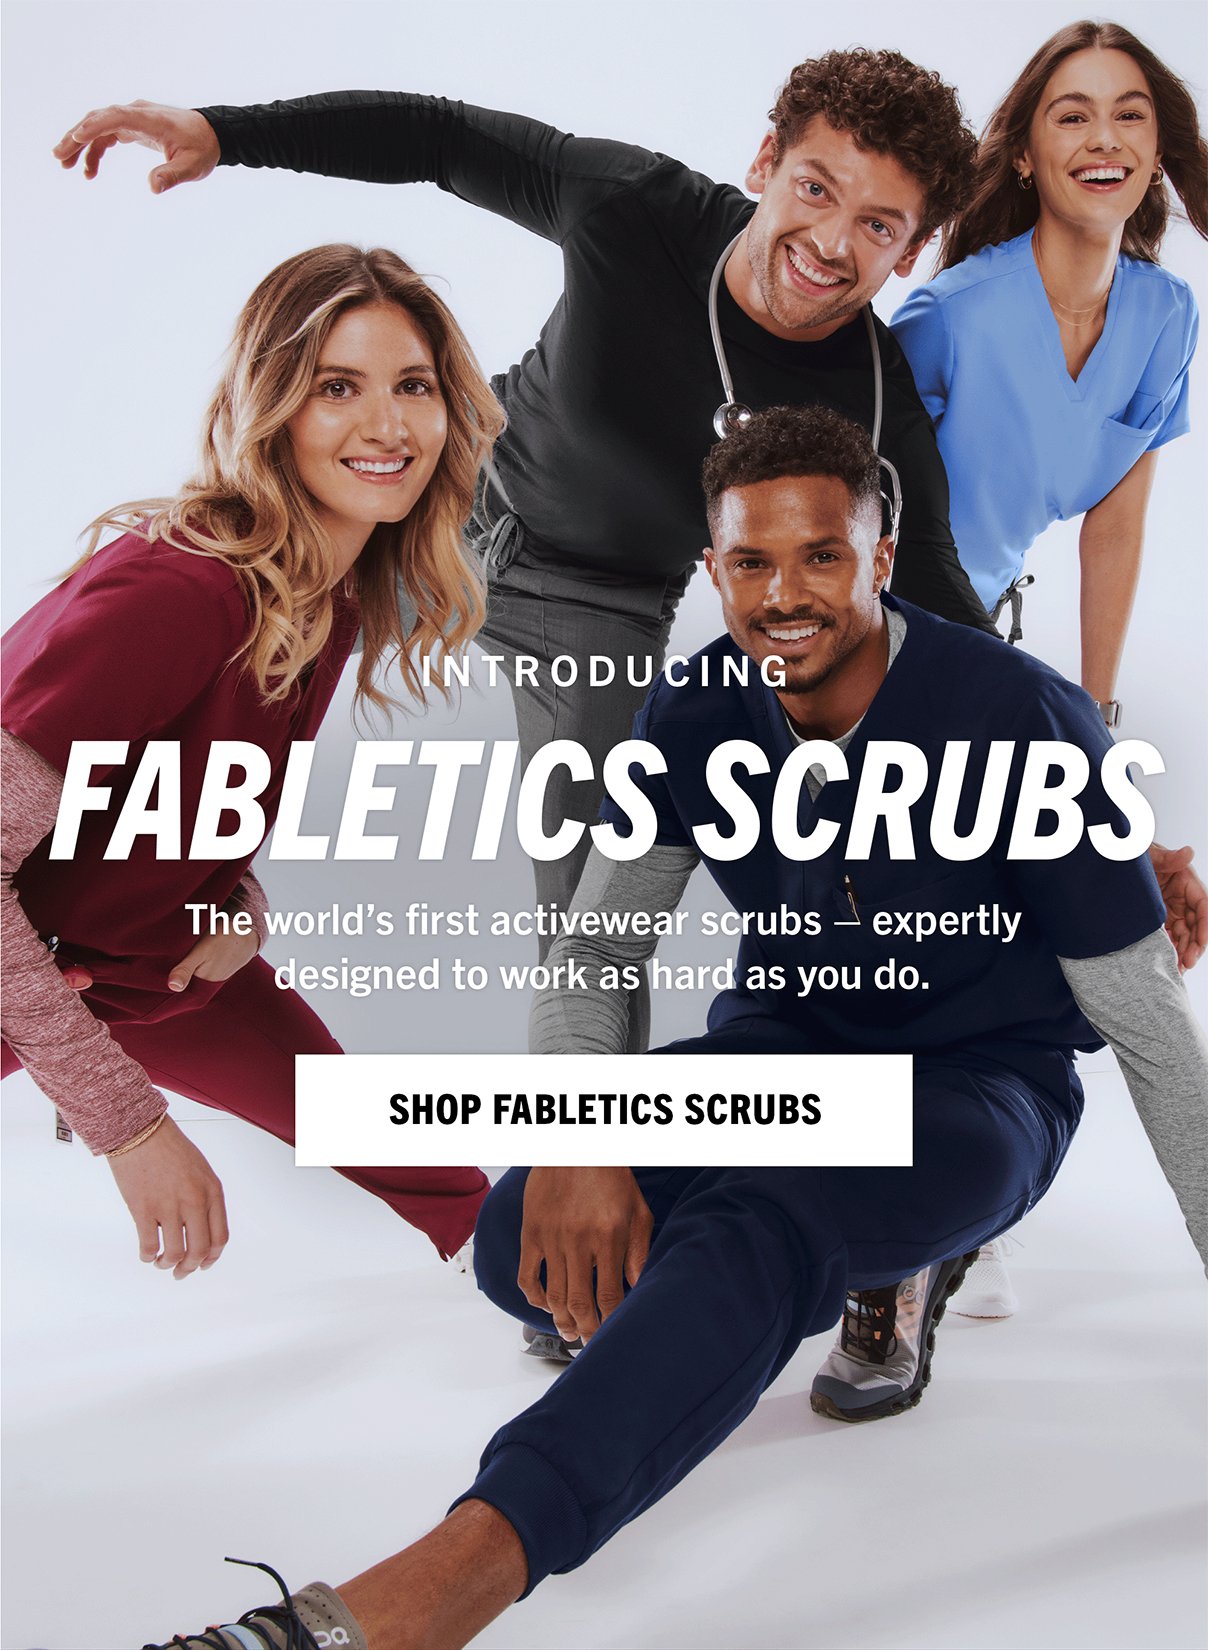 I Tried Fabletics Scrubs Are They Really Active Scrubs